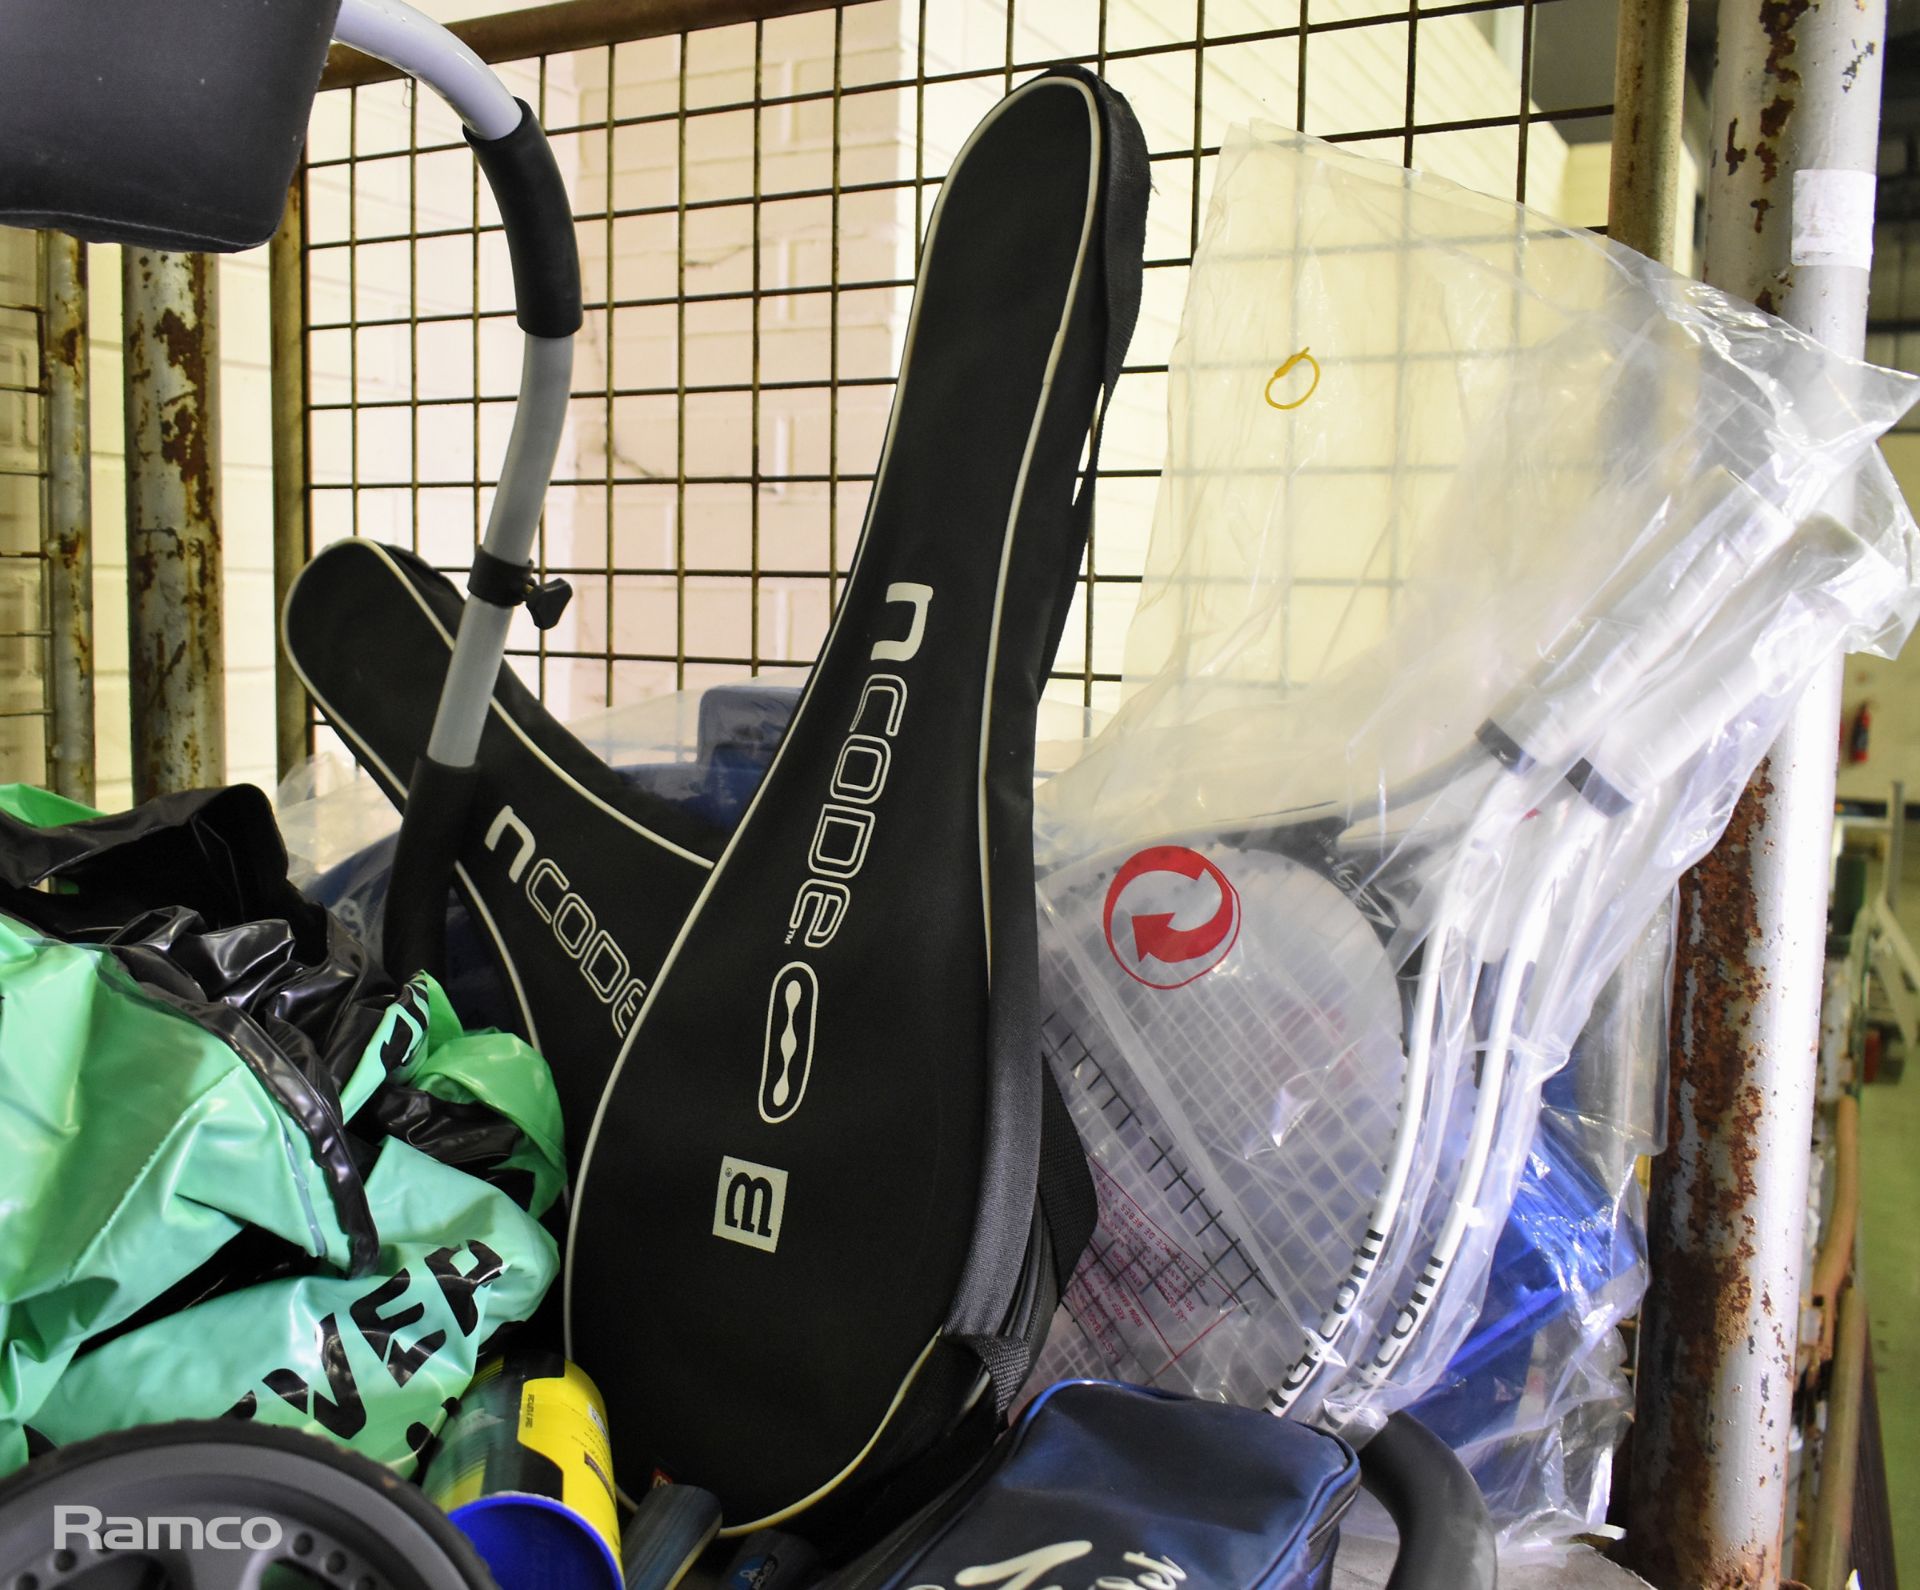 Sport exercise equipment - Tennis/badminton racket, dumbell, rounders set, various balls, inflatable - Image 5 of 7